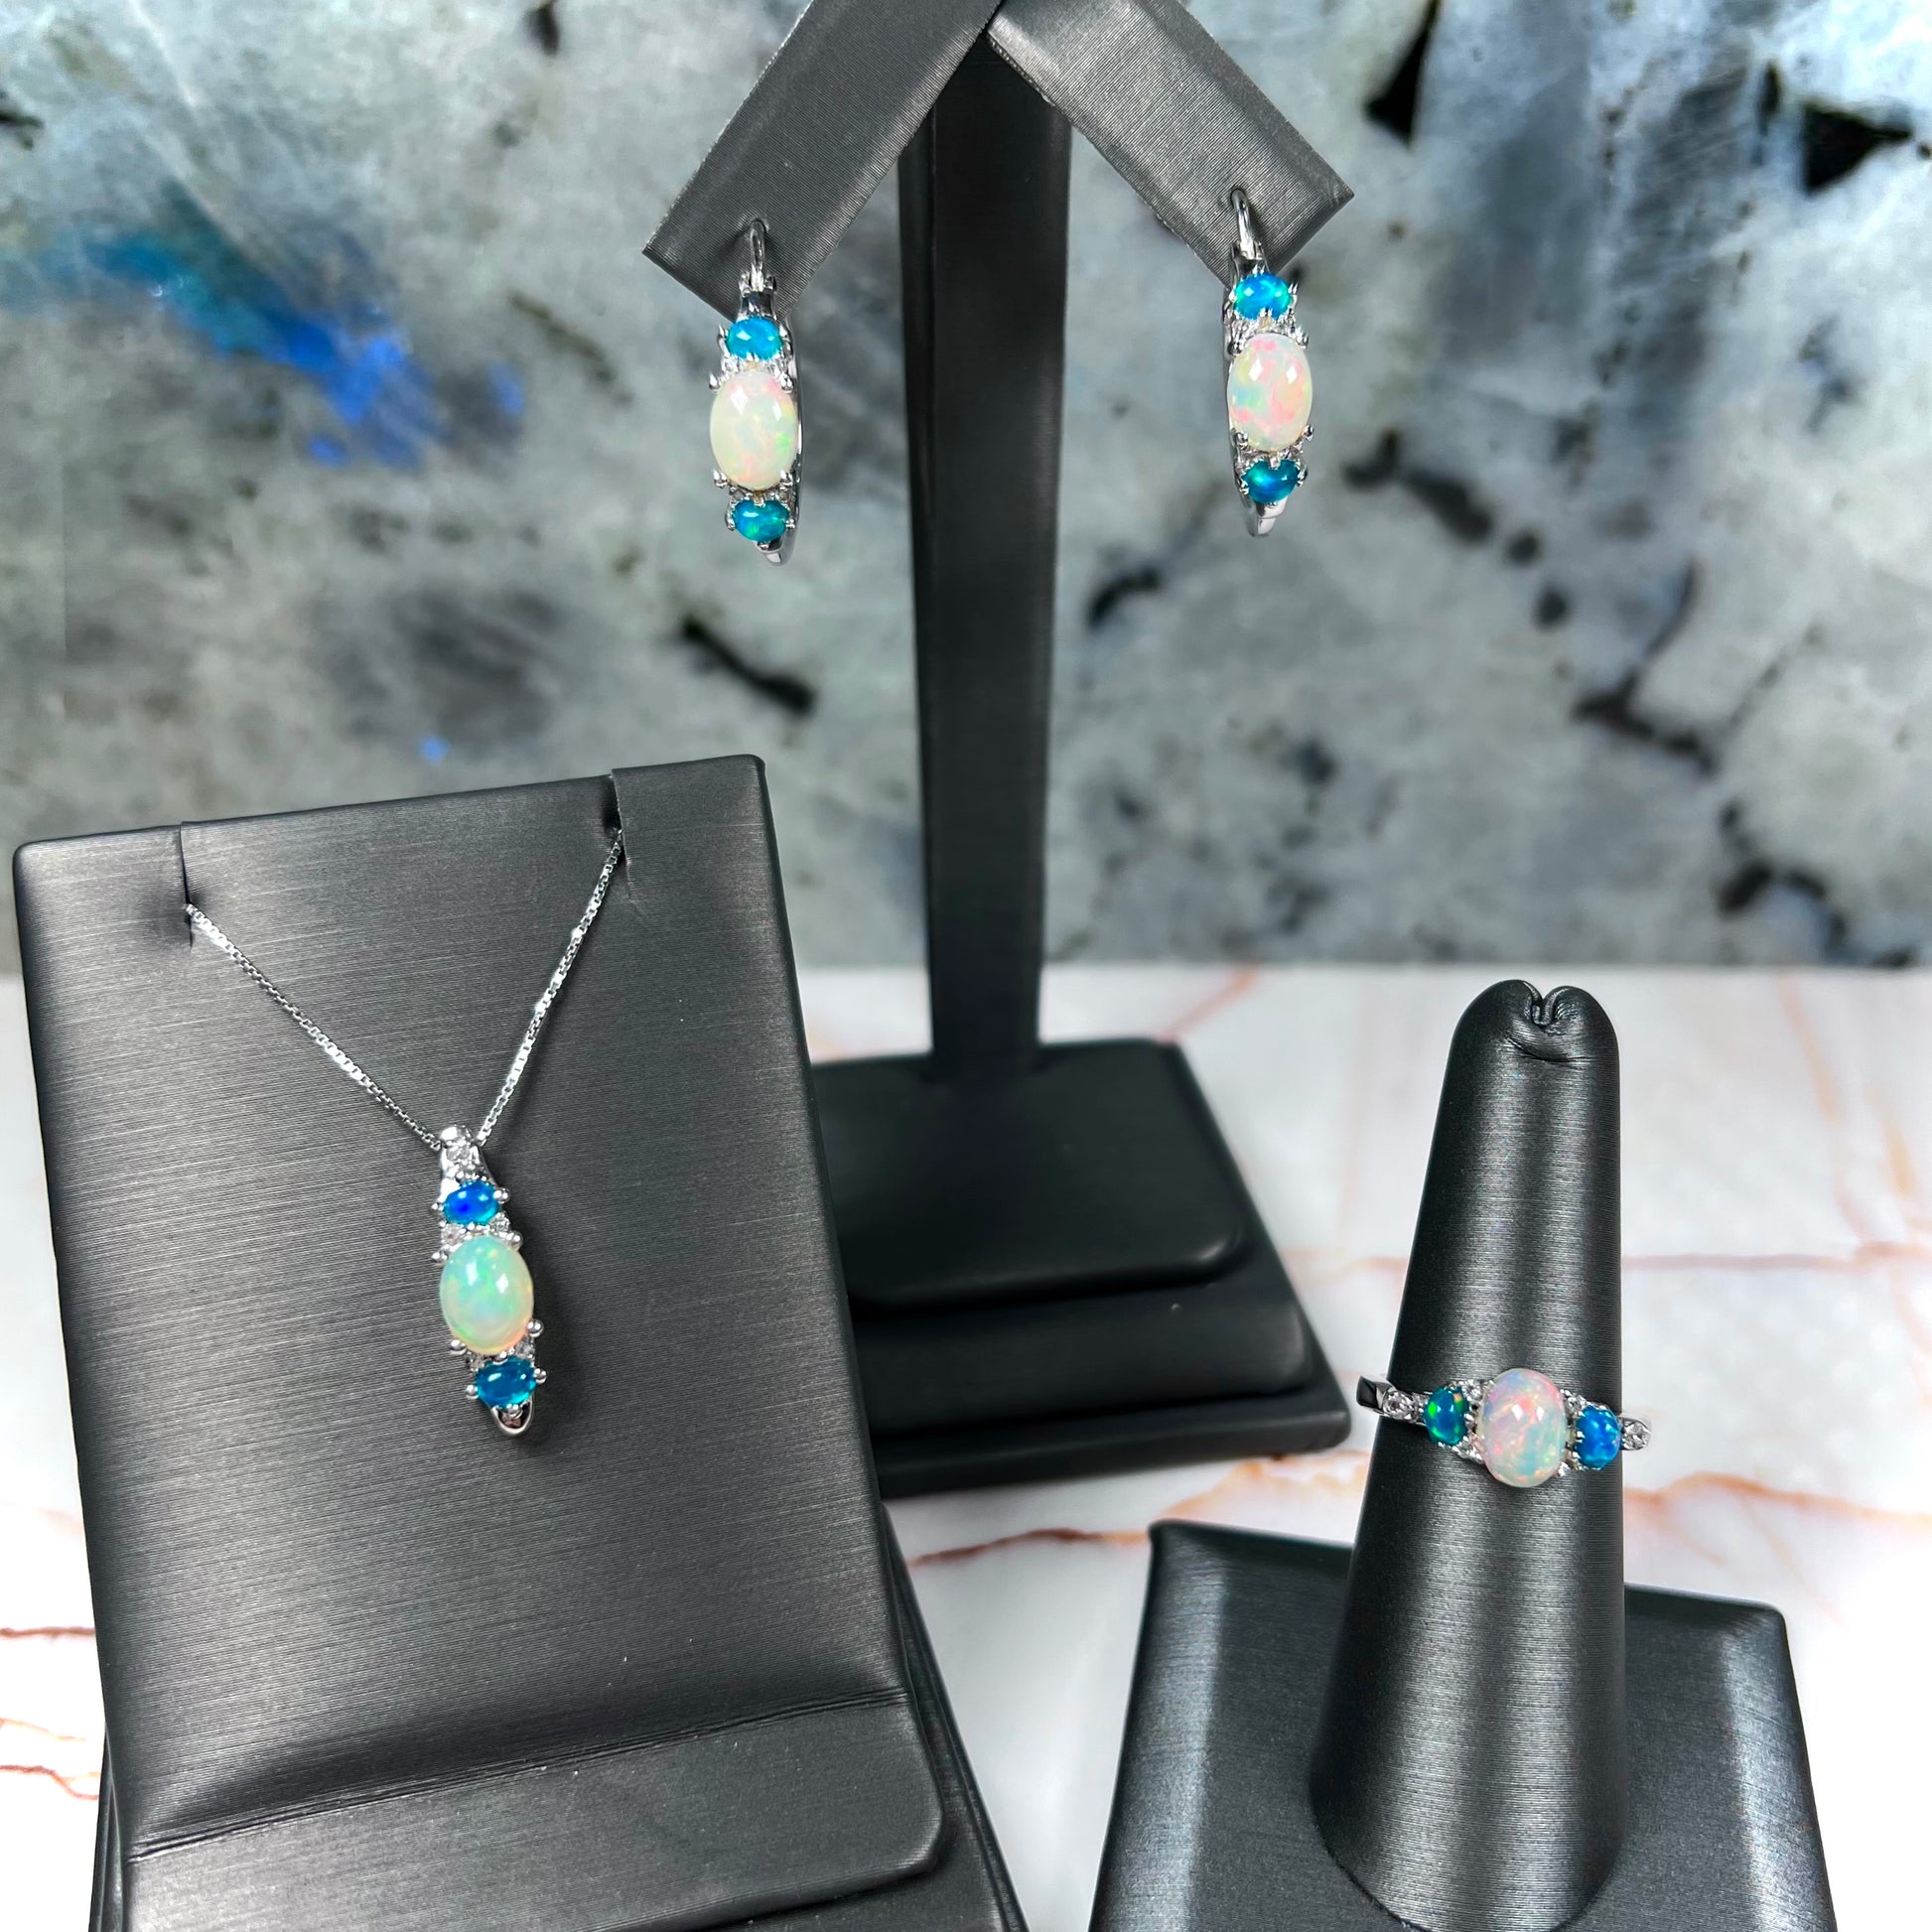 A sterling silver ring, earring, and necklace set made of Ethiopian opals and cubic zirconia.